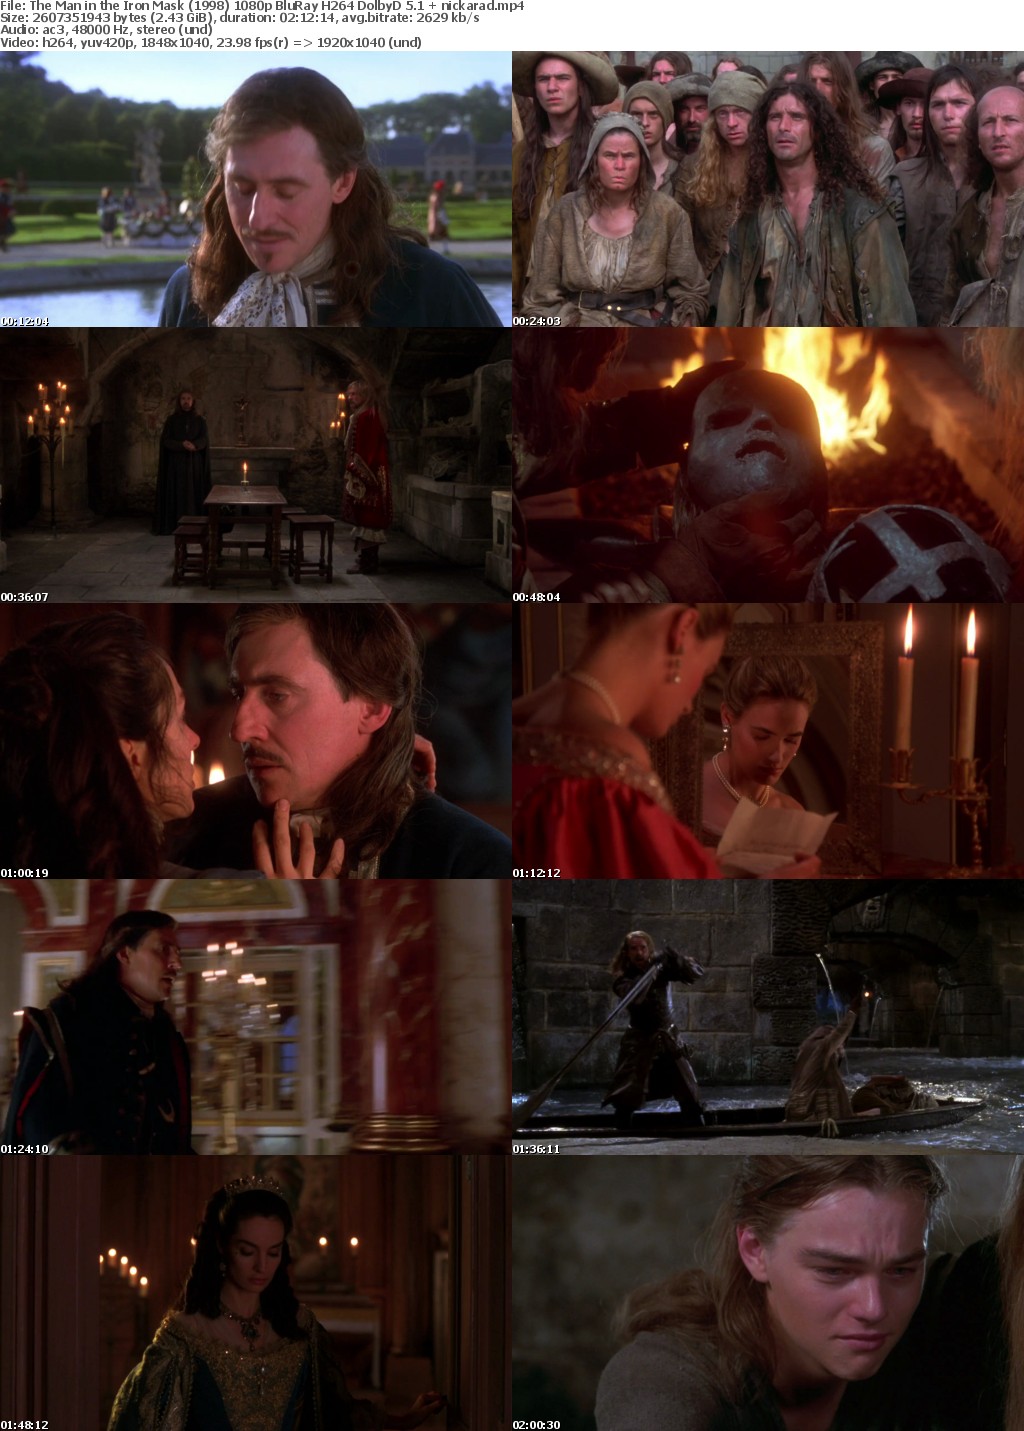 The Man in the Iron Mask (1998) 1080p BluRay H264 DolbyD 5 1 nickarad